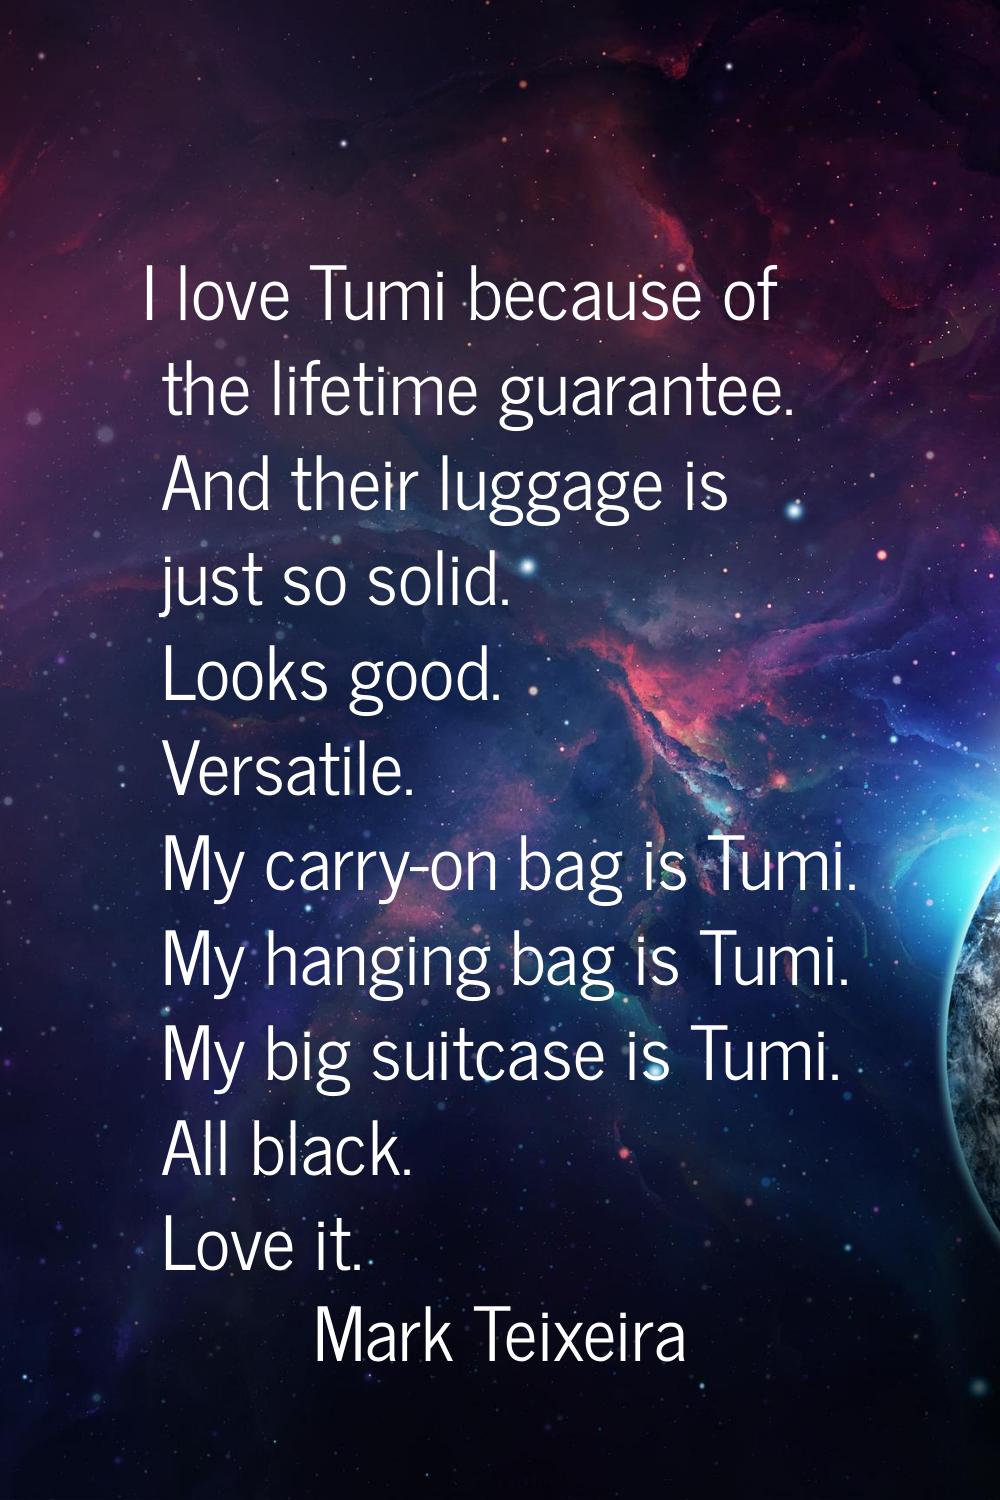 I love Tumi because of the lifetime guarantee. And their luggage is just so solid. Looks good. Vers